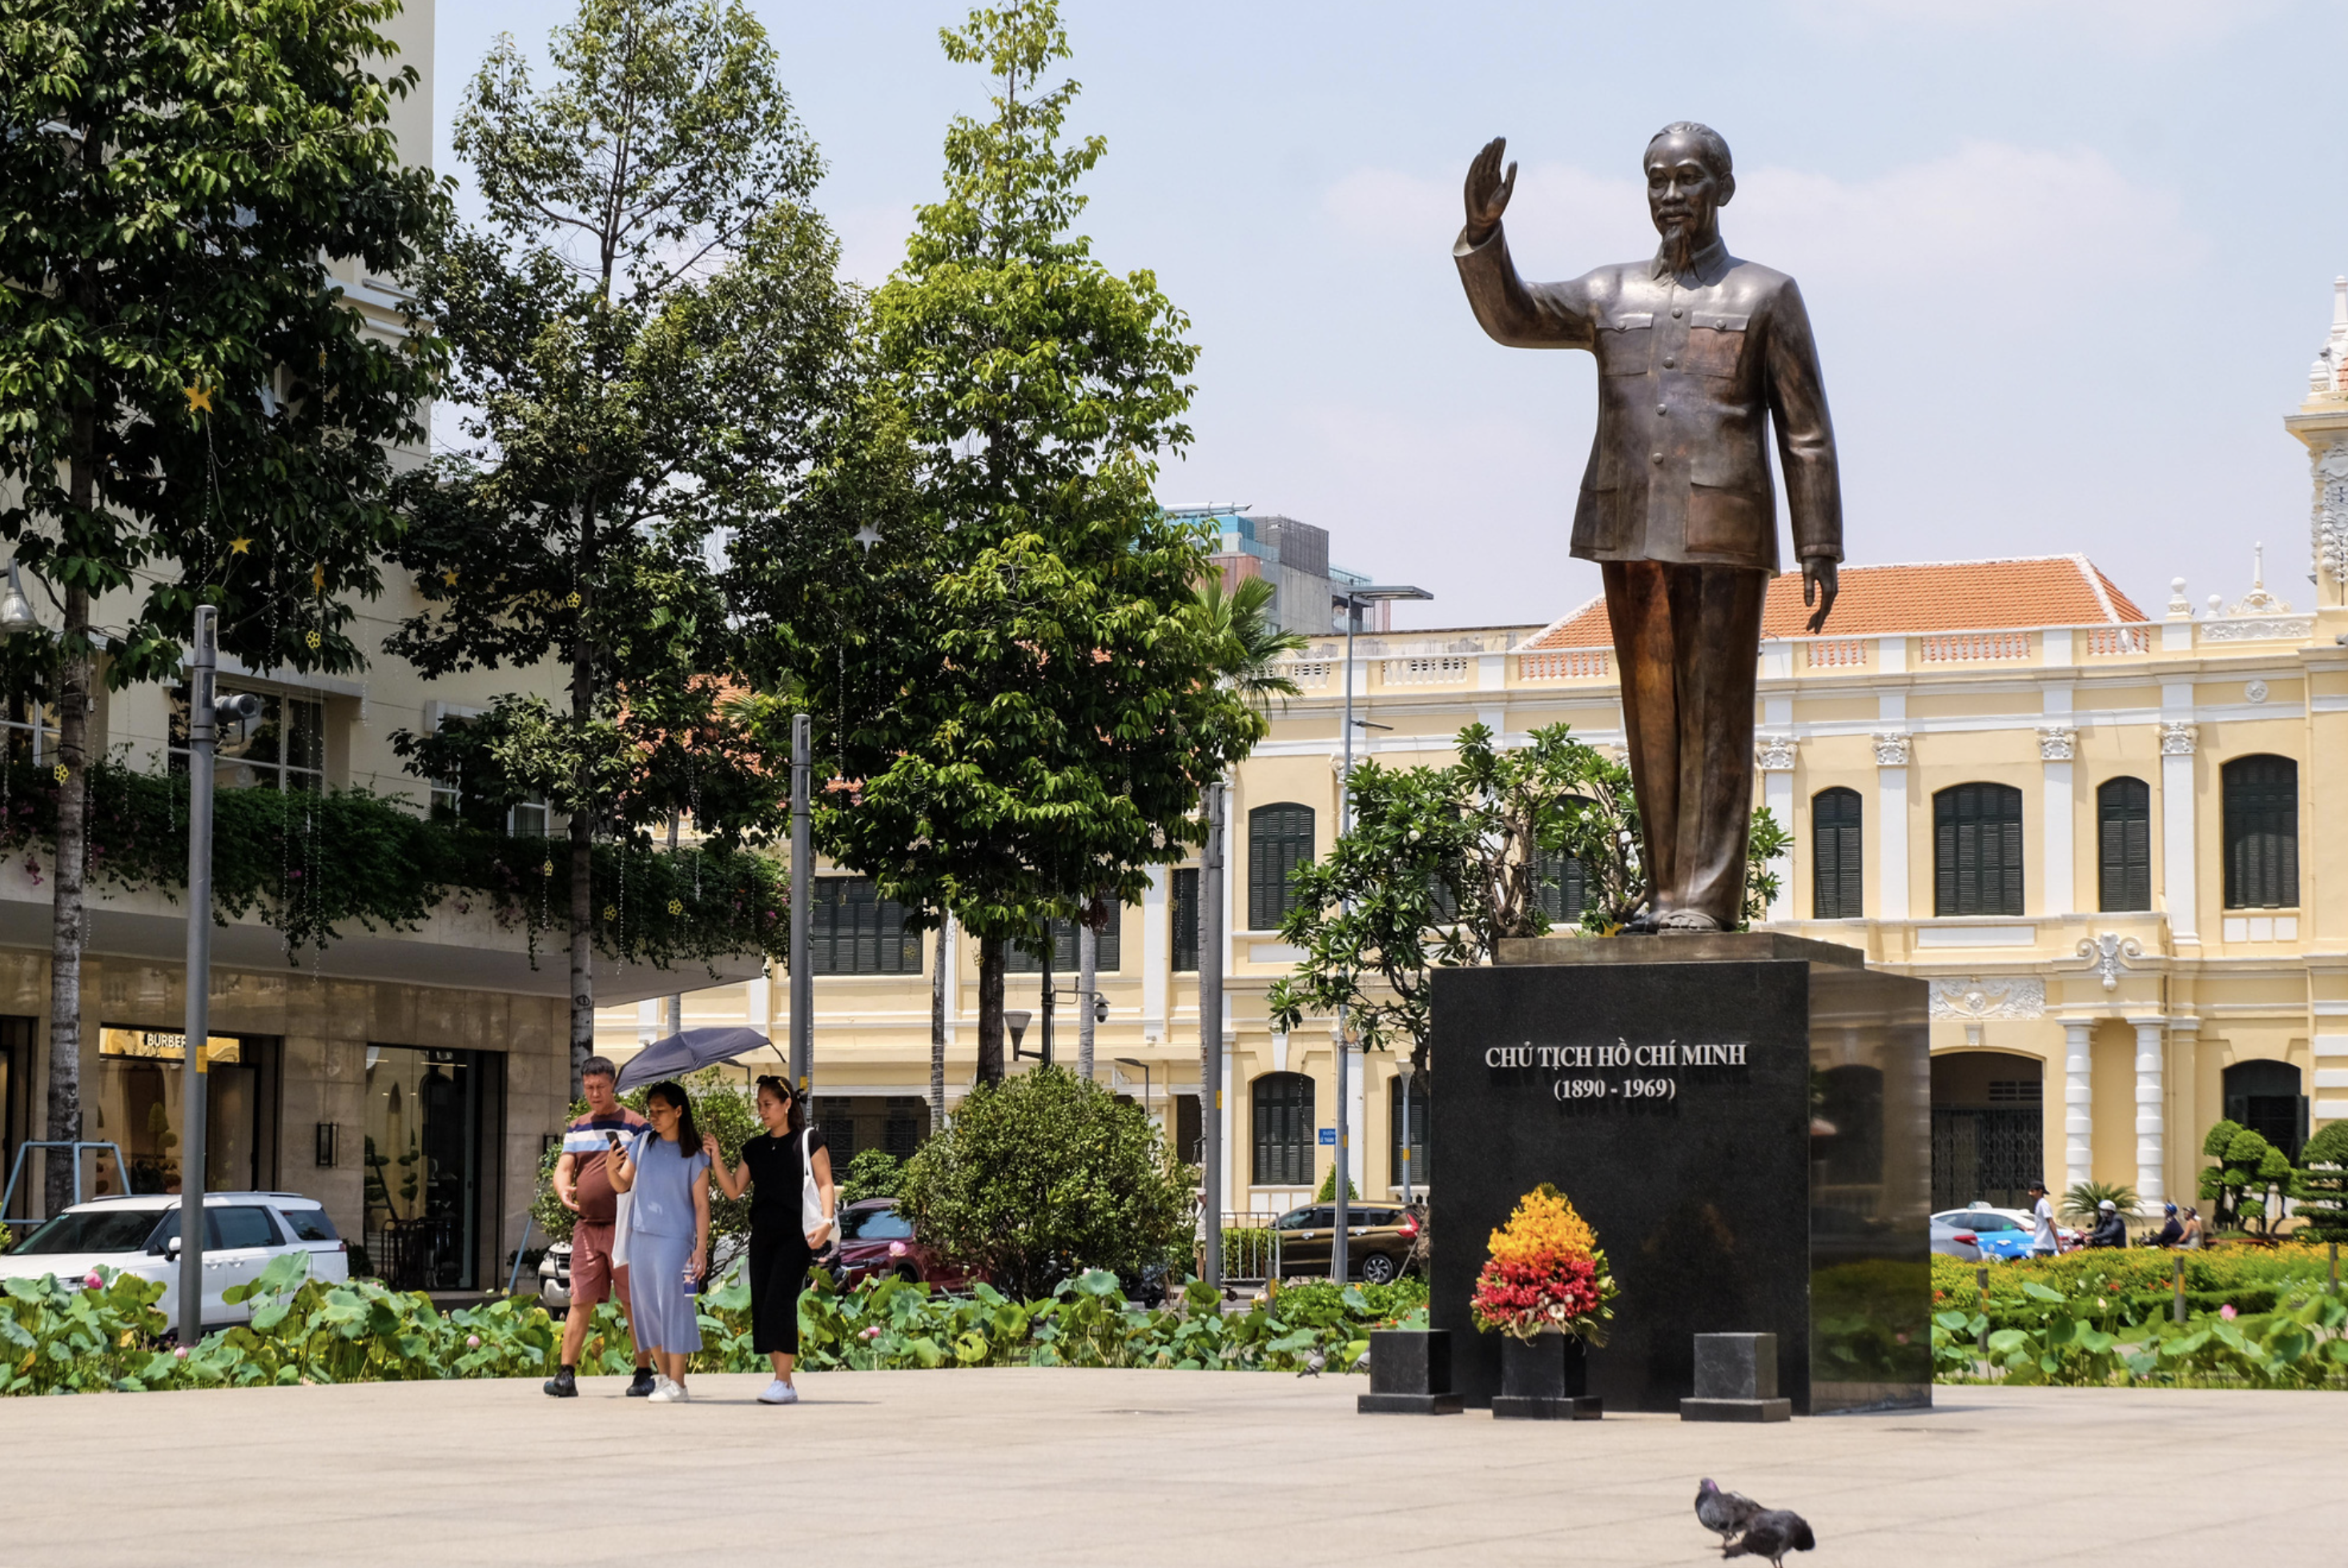 The bronze statue of late President Ho Chi Minh at the park in front of the office building of the Ho Chi Minh City People’s Committee is 7.2 meters high. Photo: Phuong Nhi / Tuoi Tre